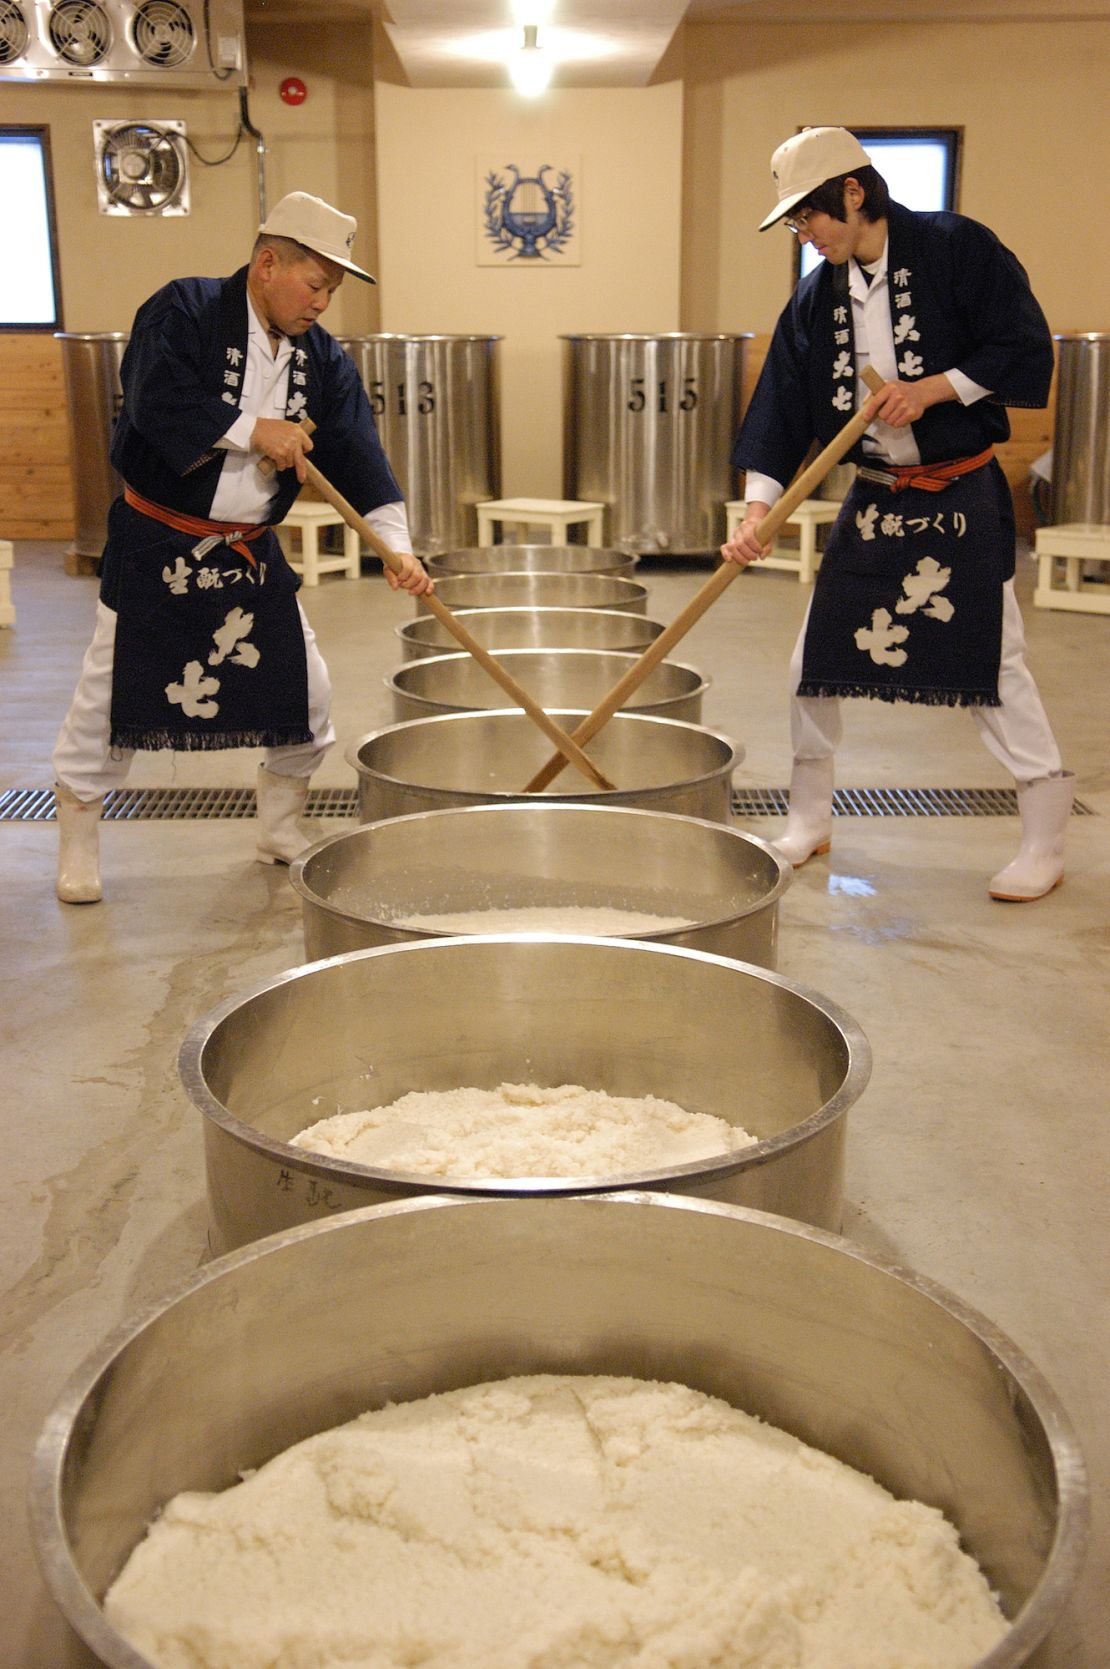 The labor-intensive kimoto method practiced at Daishichi has been abandoned by many breweries. 